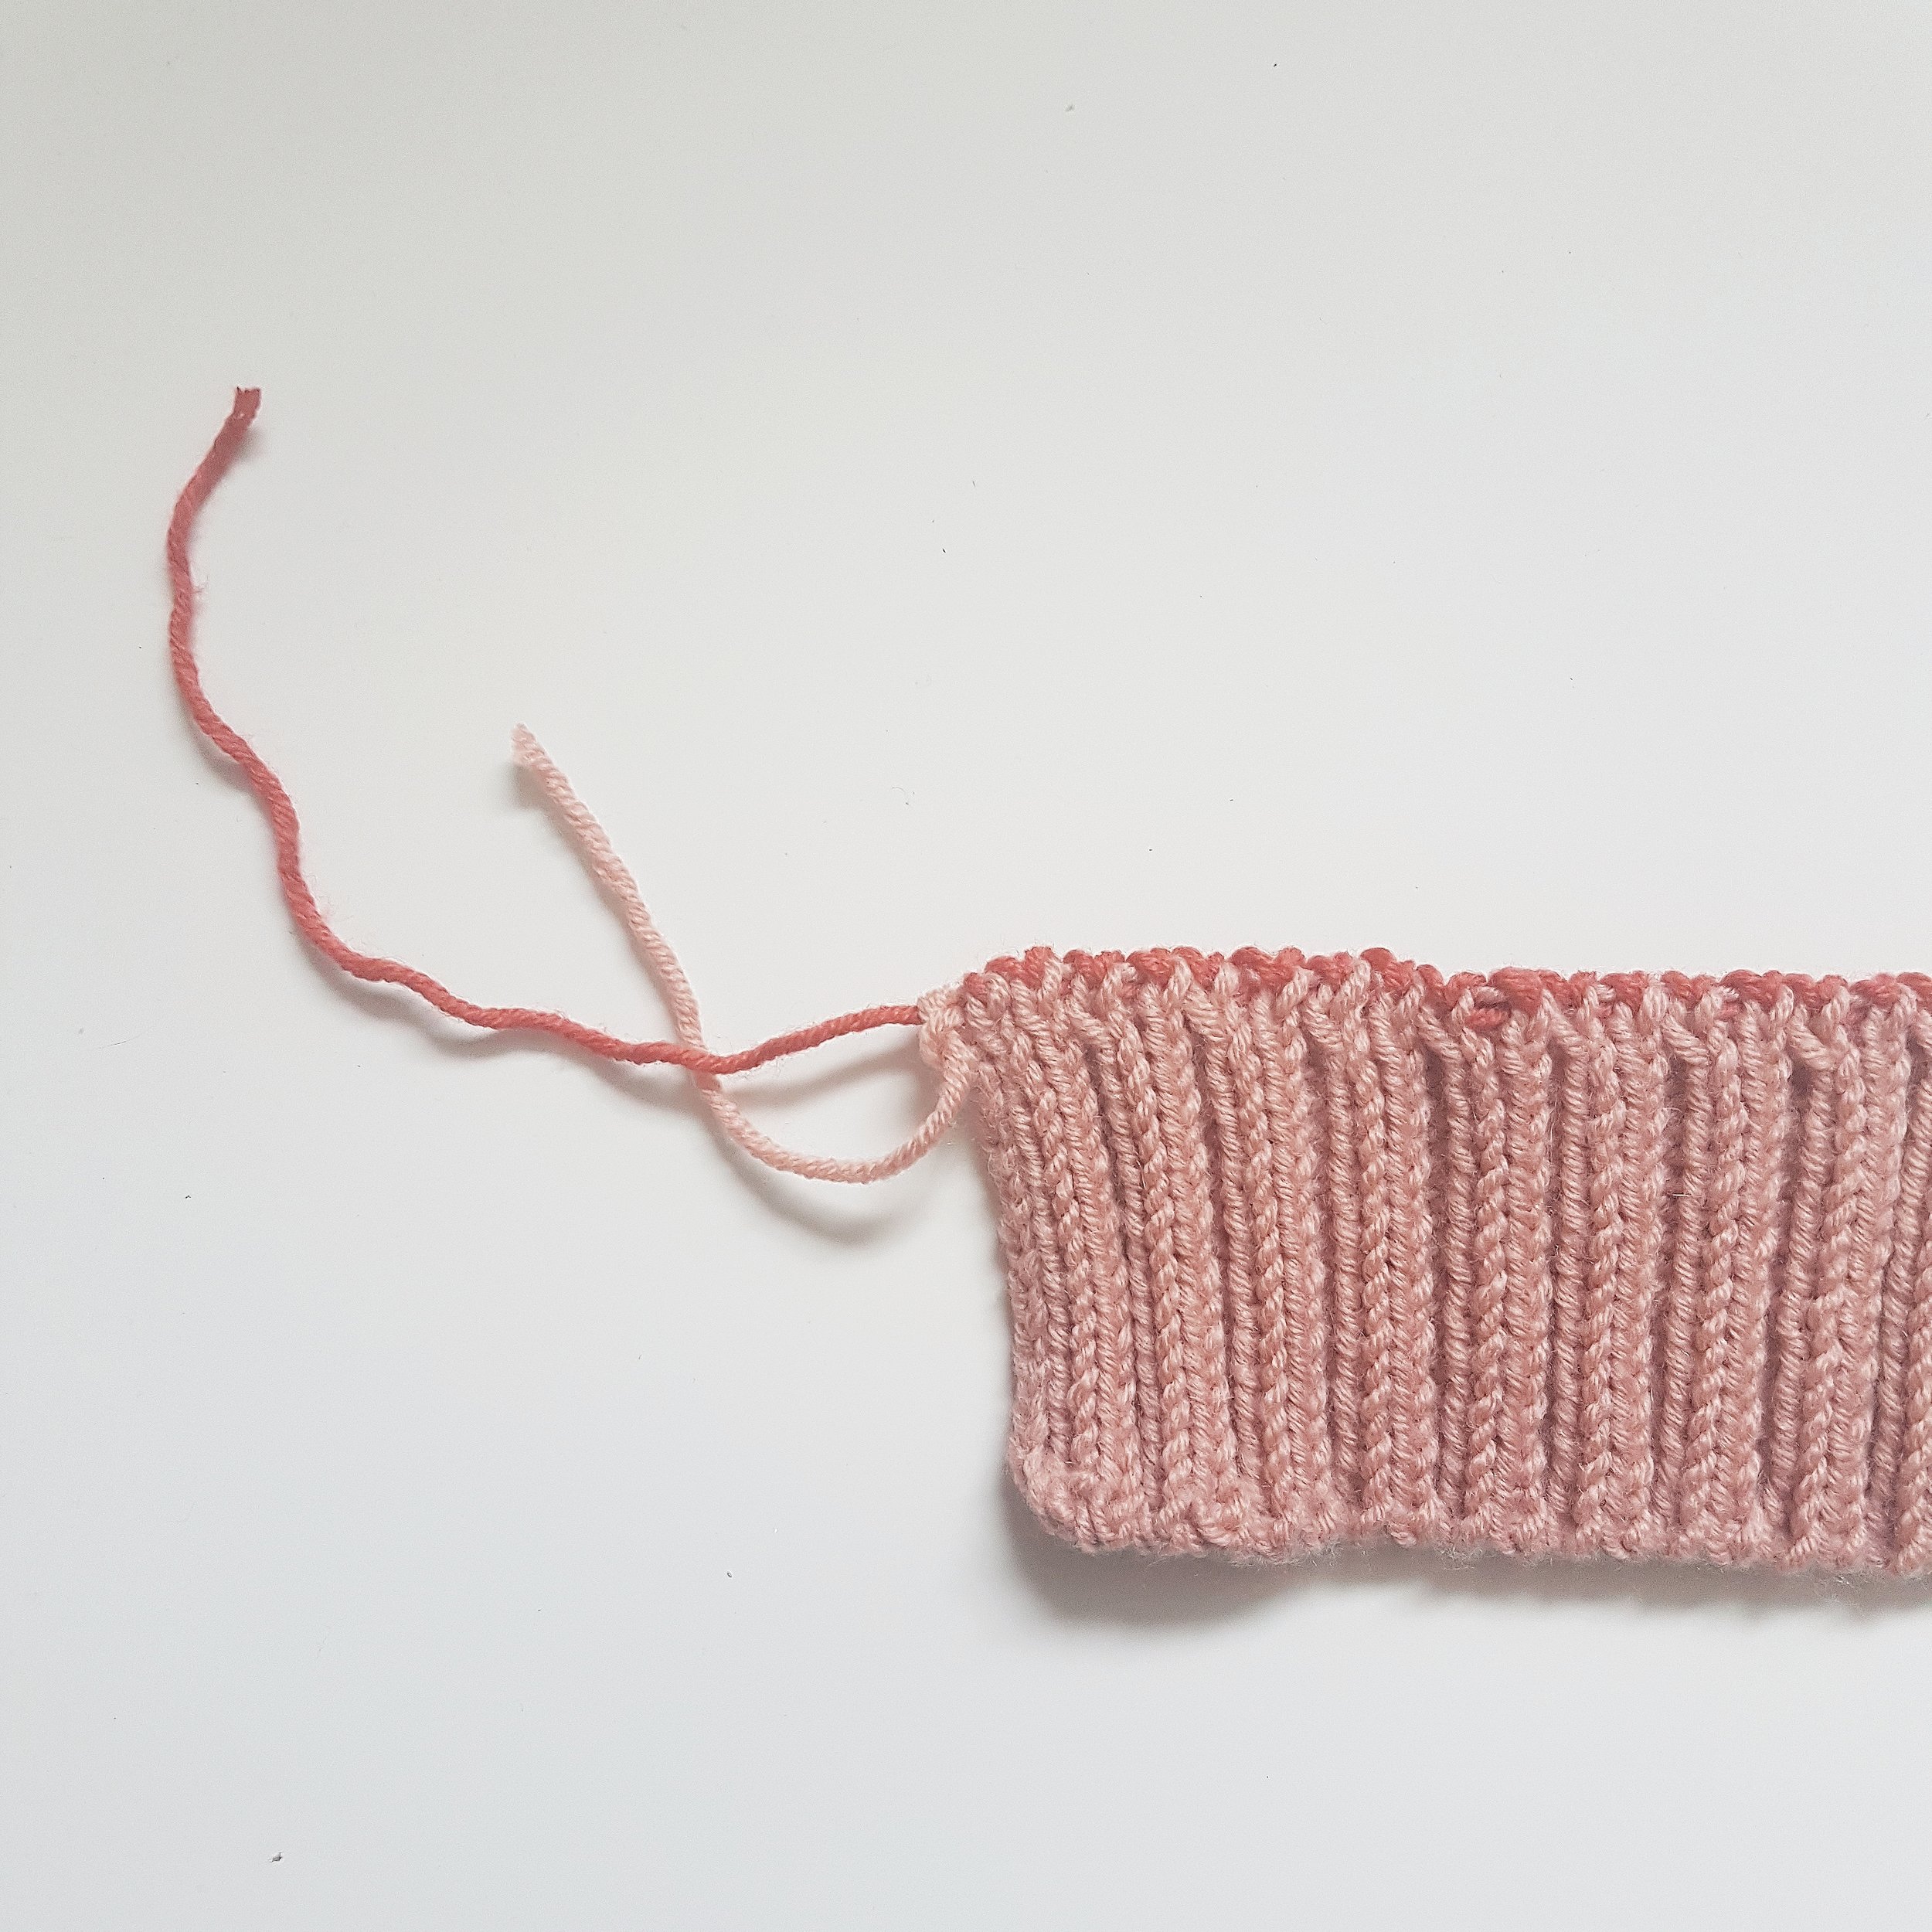 How to Knit the Tubular Bind-Off for 2x2 Rib